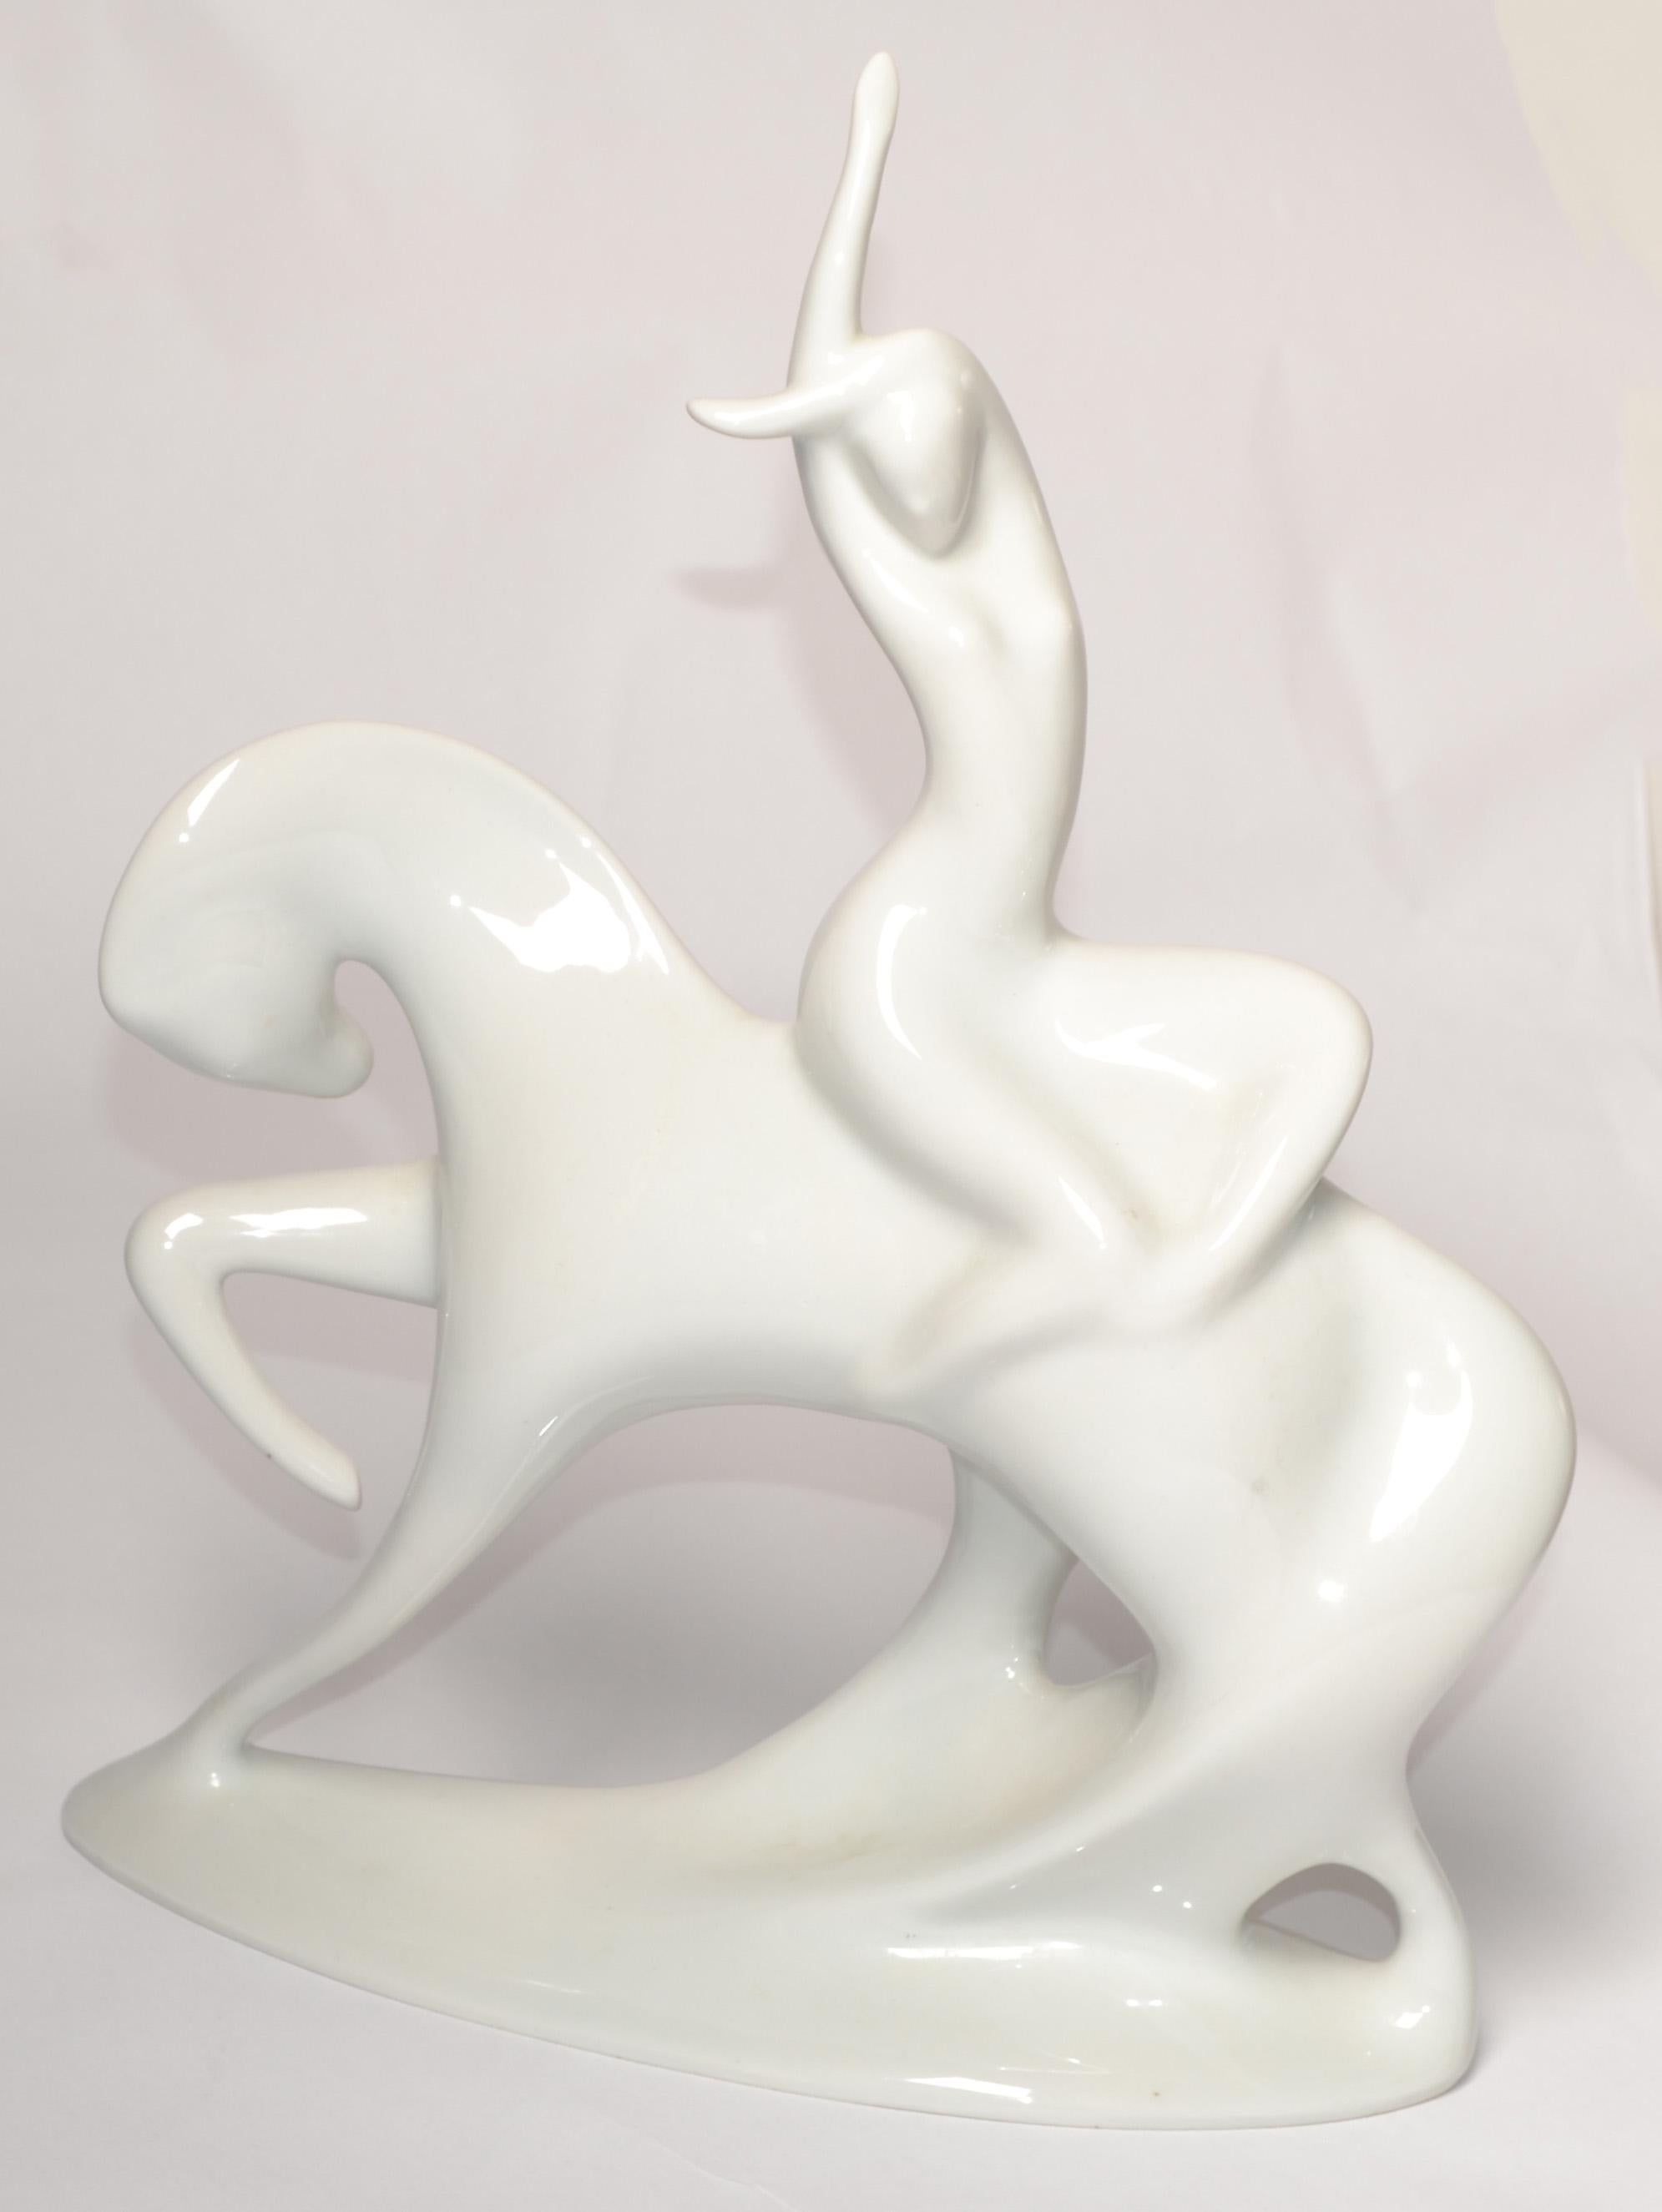 1960s Jitro Porcelain Hand-Painted Statue by Jaroslav Ježek for Royal Dux Bohemia Sculpture made in the Czech Republic circa 1966.
Depicting a Nude Woman riding on a horse. A white high gloss glazed porcelain Figurine, Statue or Sculpture.
Makers